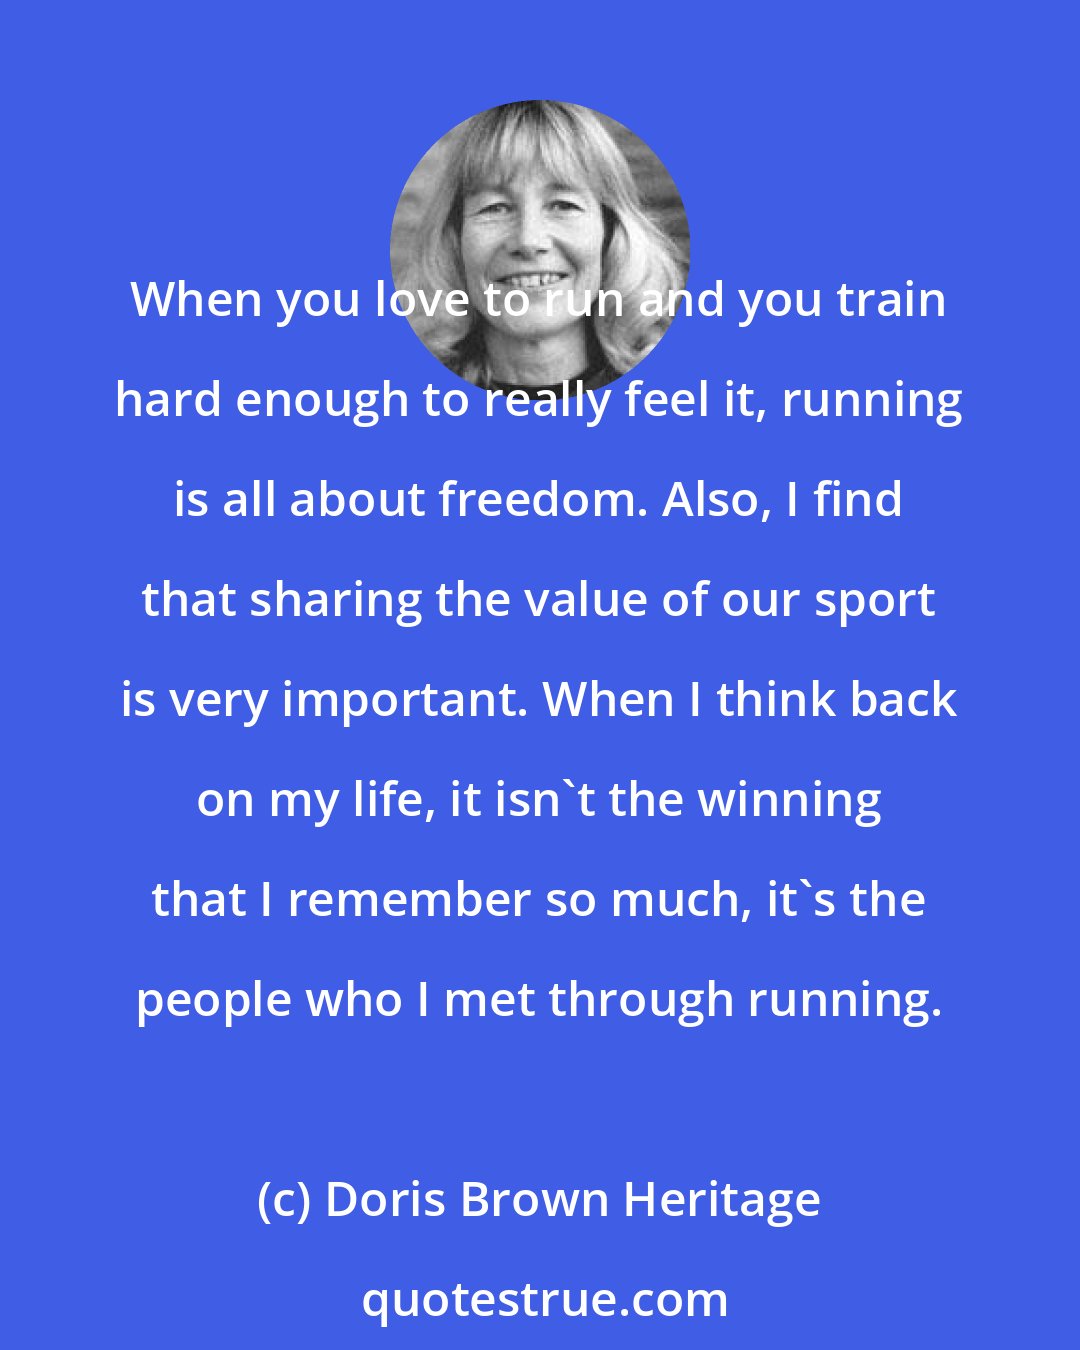 Doris Brown Heritage: When you love to run and you train hard enough to really feel it, running is all about freedom. Also, I find that sharing the value of our sport is very important. When I think back on my life, it isn't the winning that I remember so much, it's the people who I met through running.